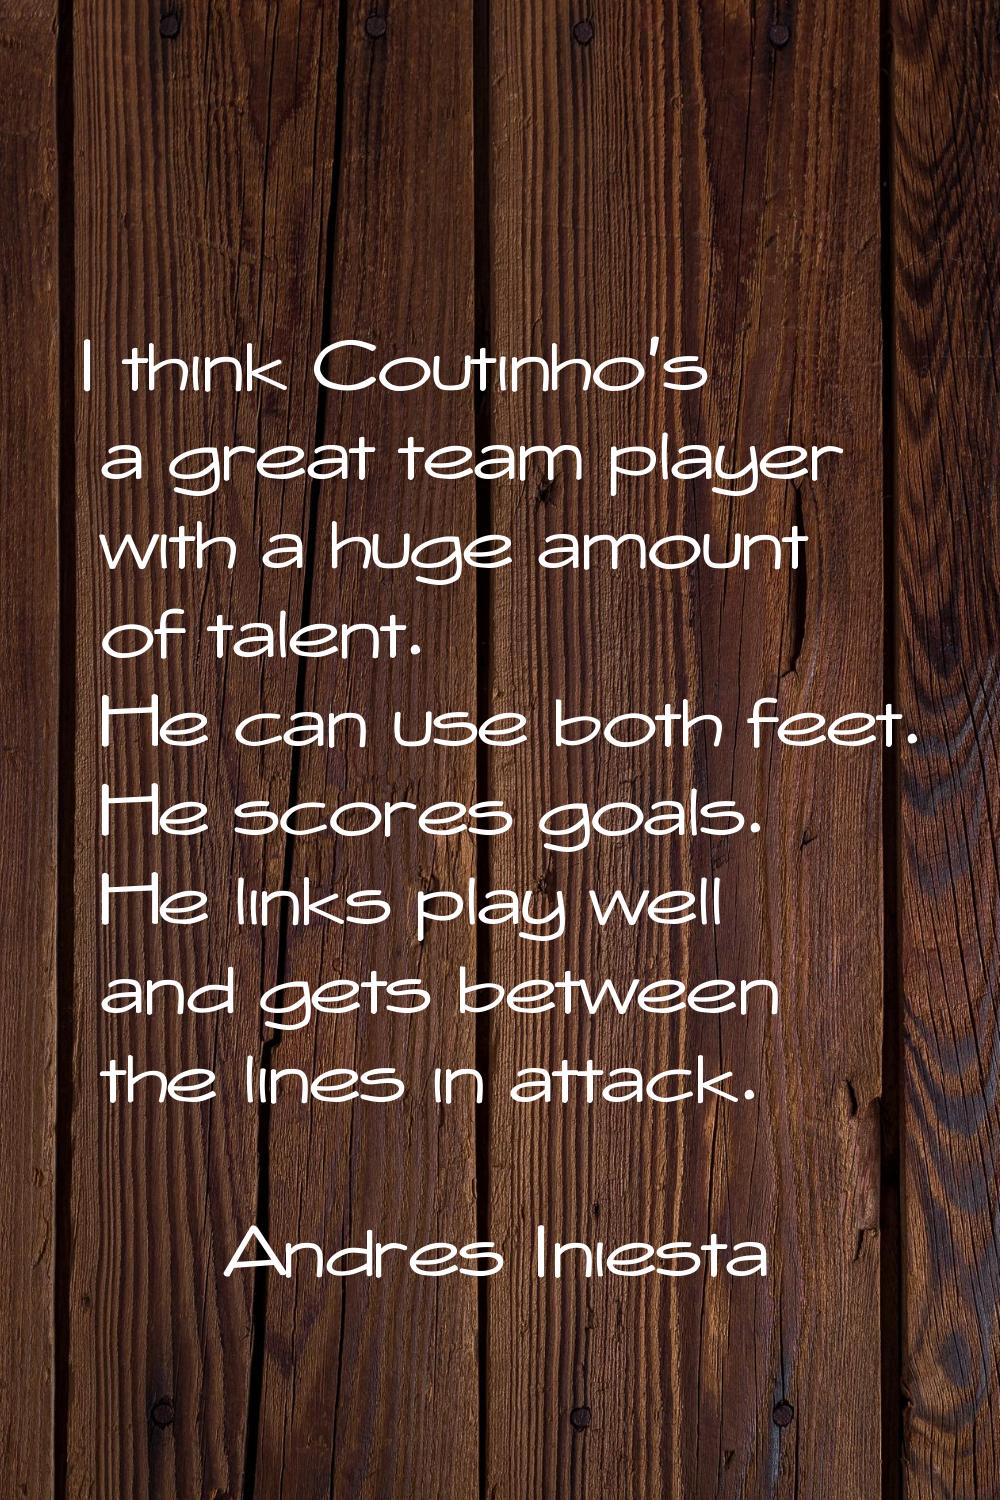 I think Coutinho's a great team player with a huge amount of talent. He can use both feet. He score